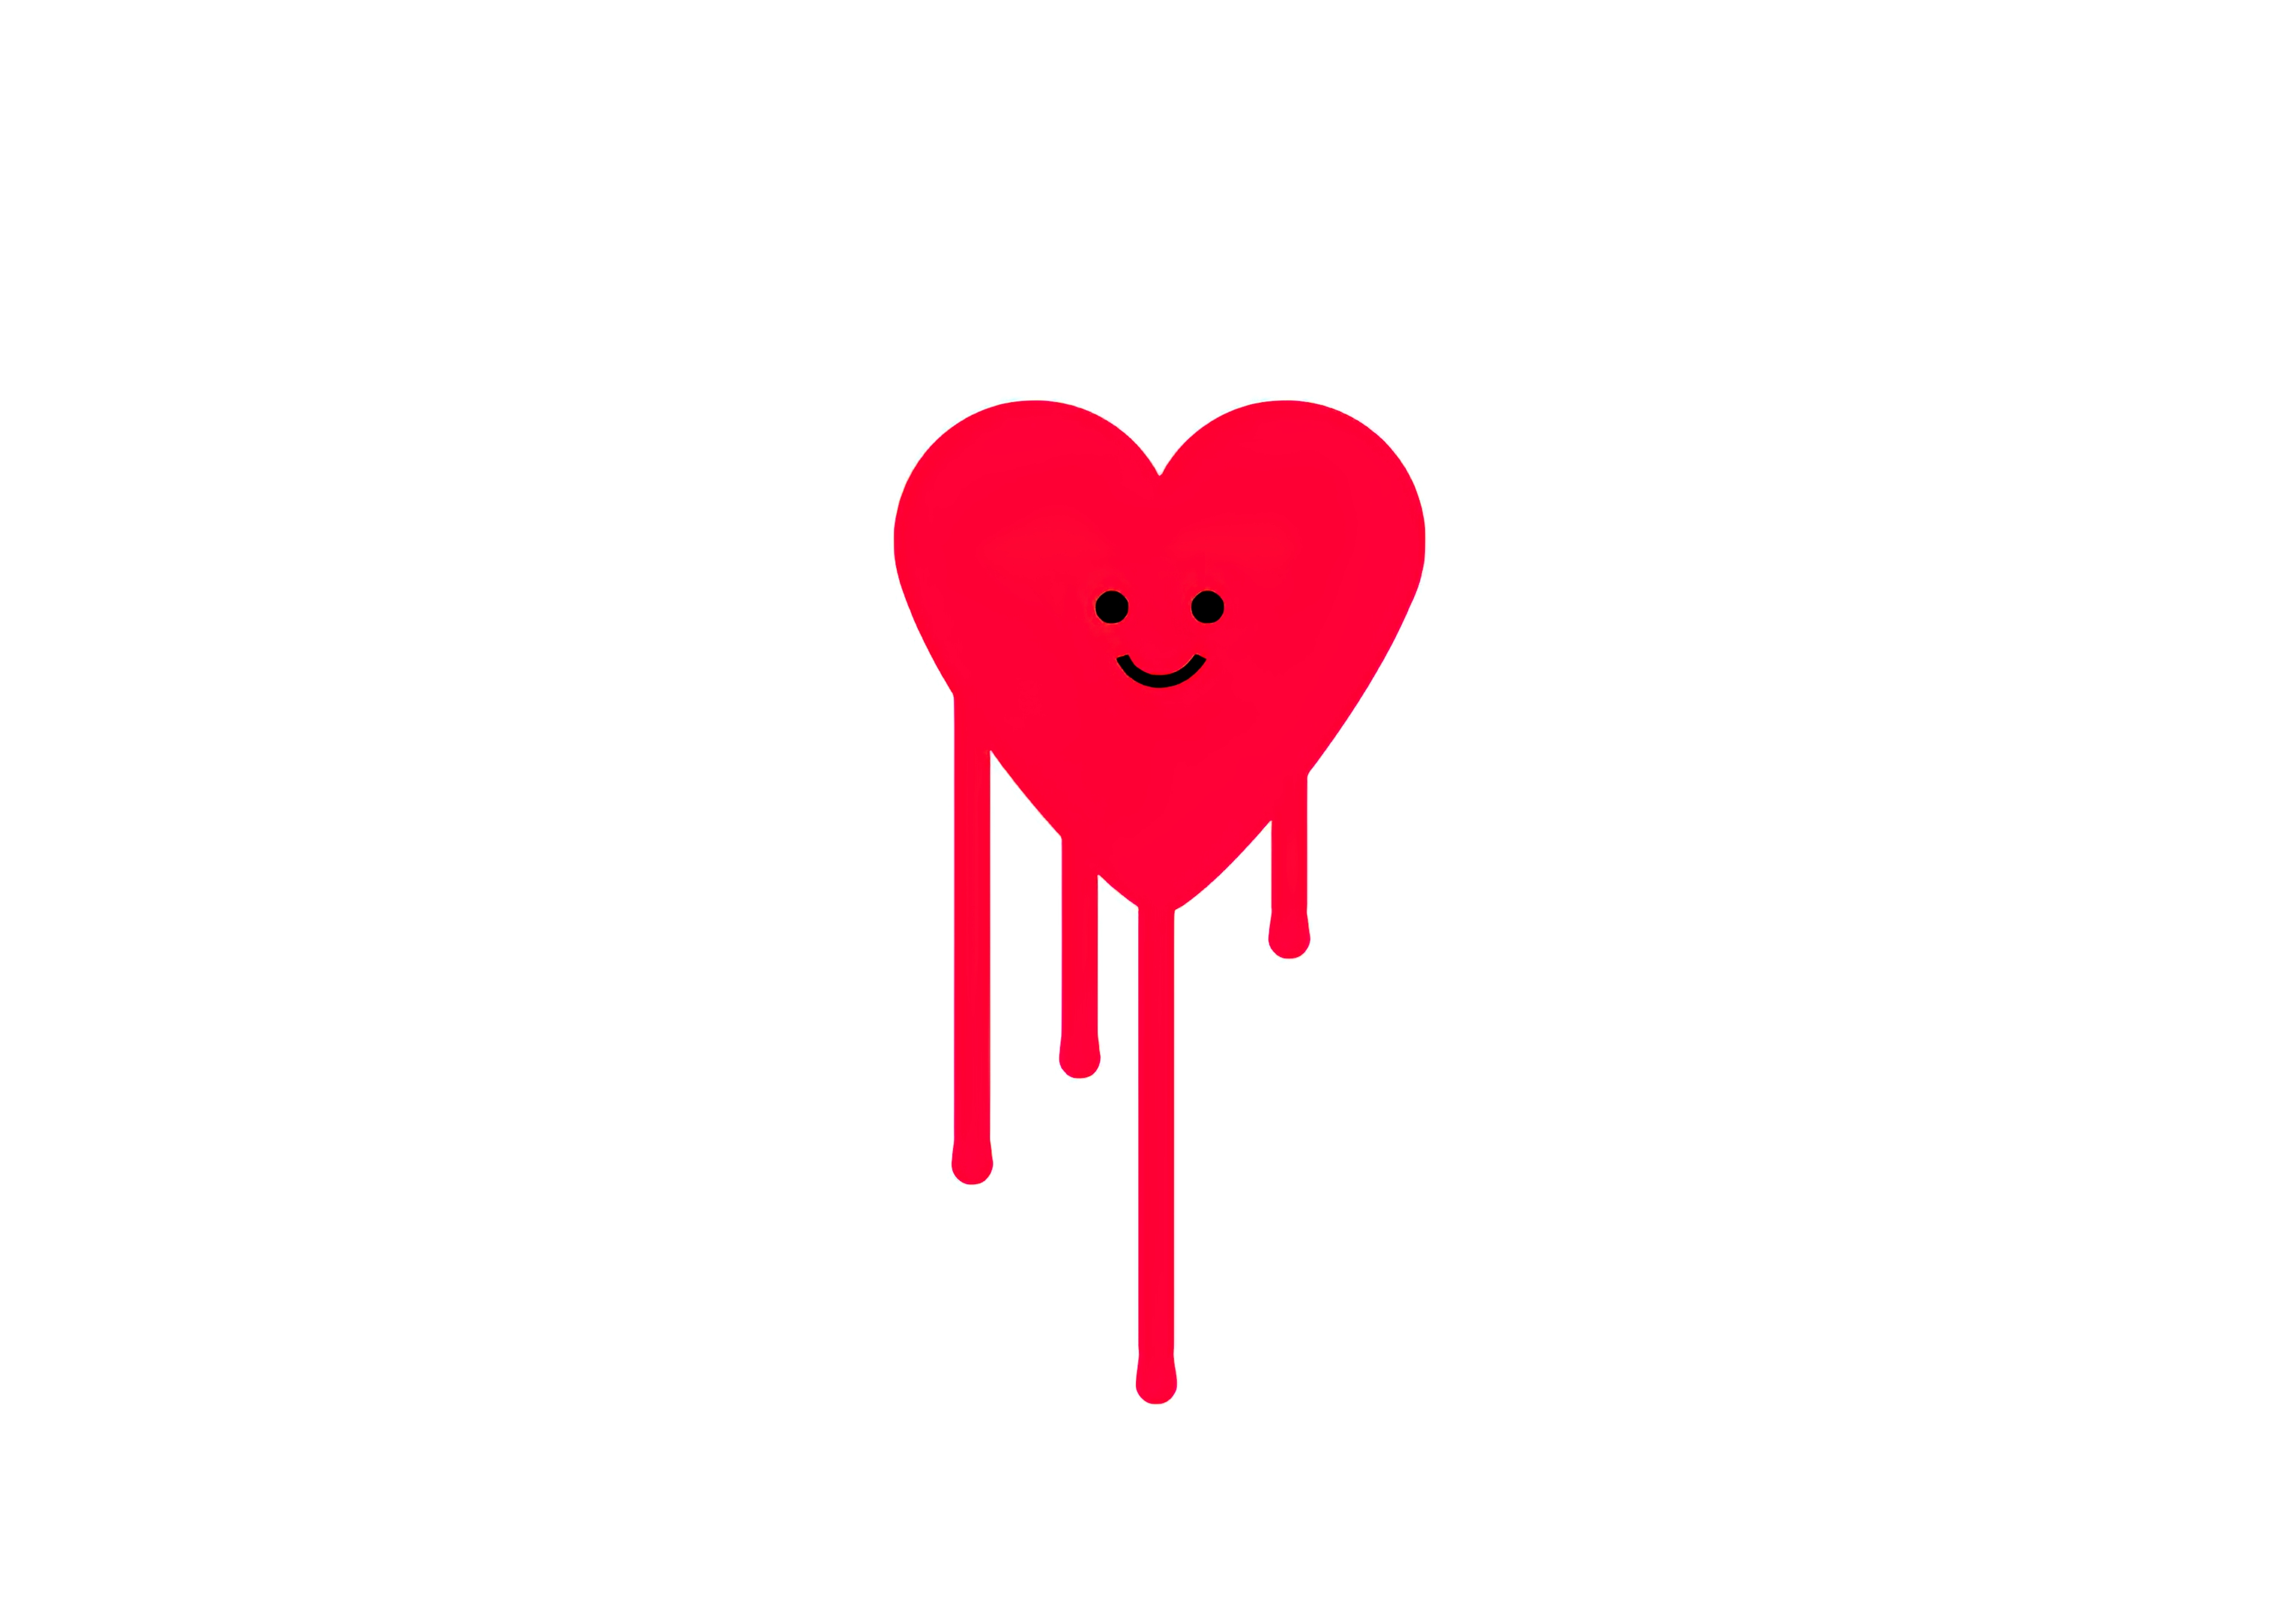 HD wallpaper, Red Heart, Drippy Heart, White Background, Simple, Heart Smiley